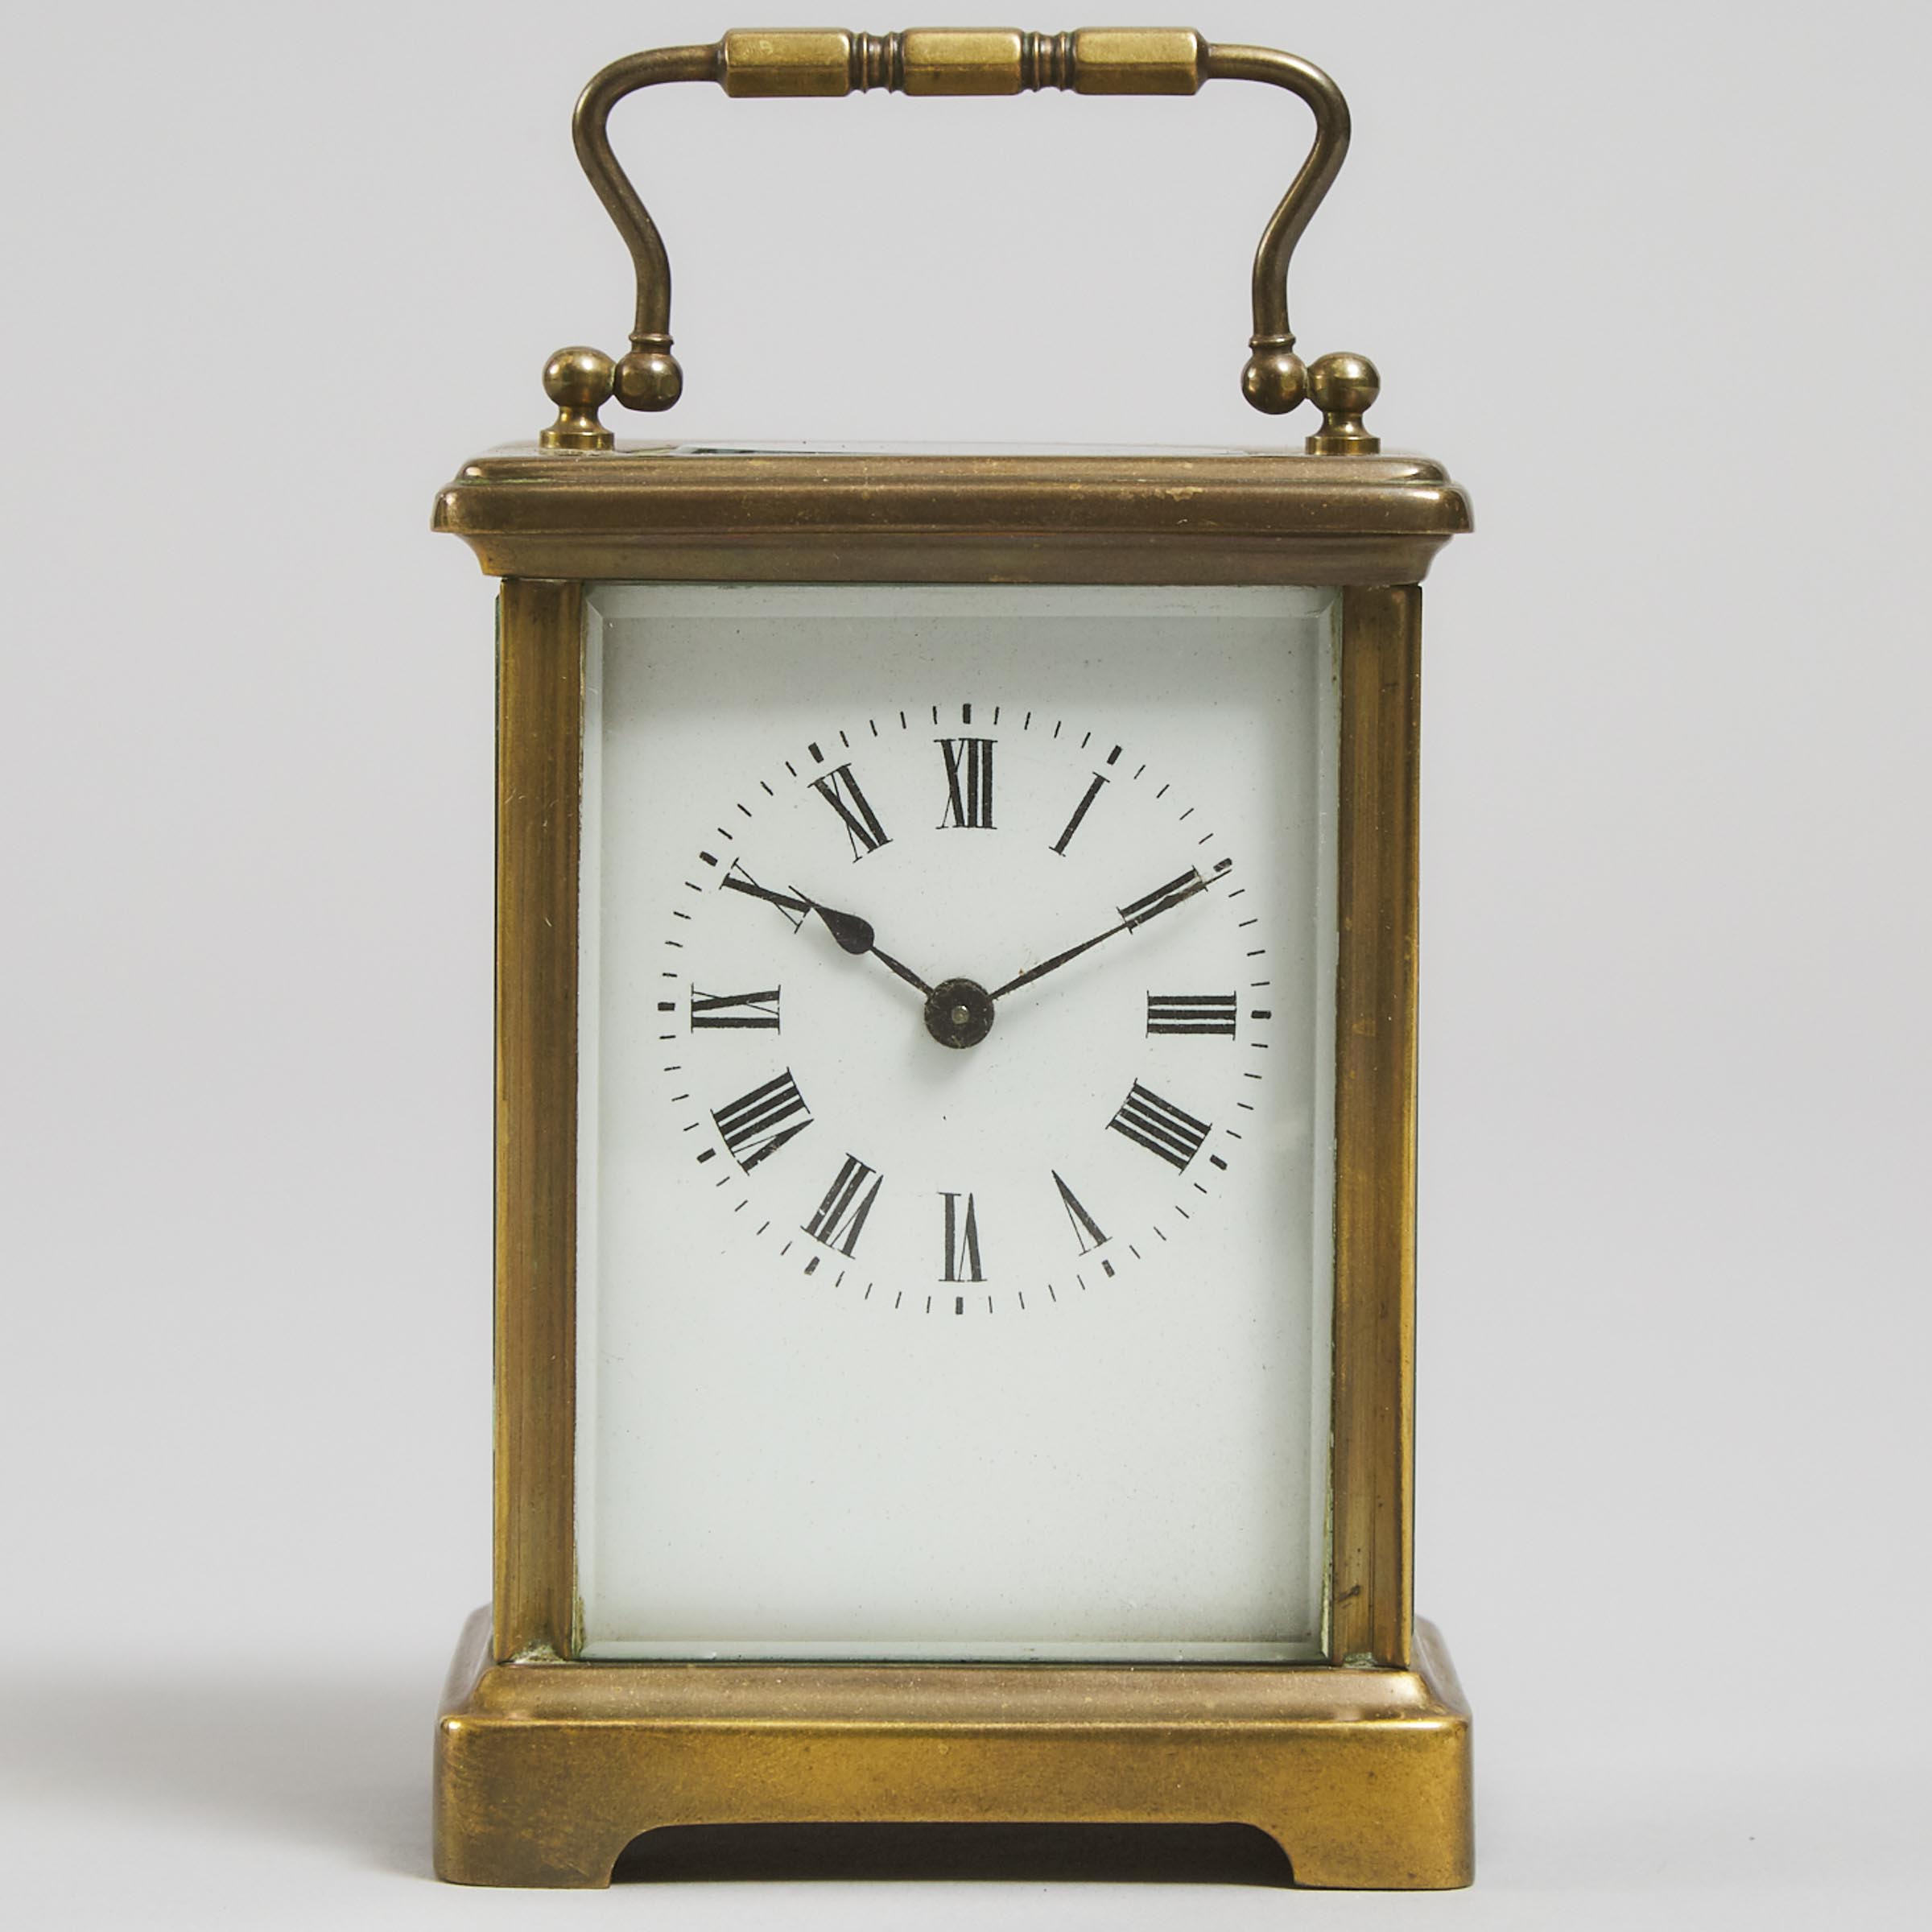 French Carriage Clock, early 20th century